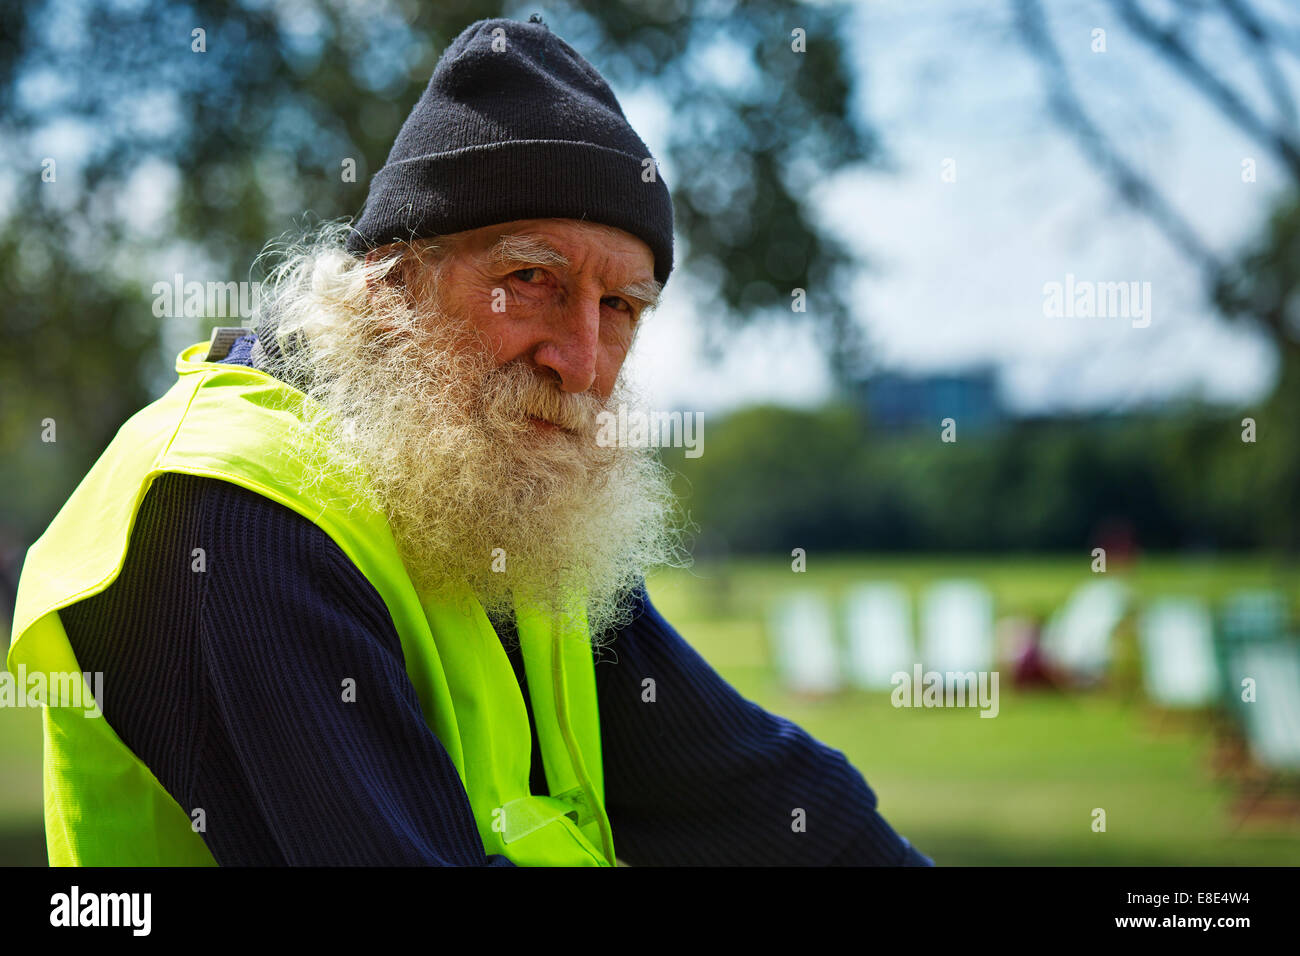 A man with a long gray beard sitting on a bike with high visibility vest on Stock Photo